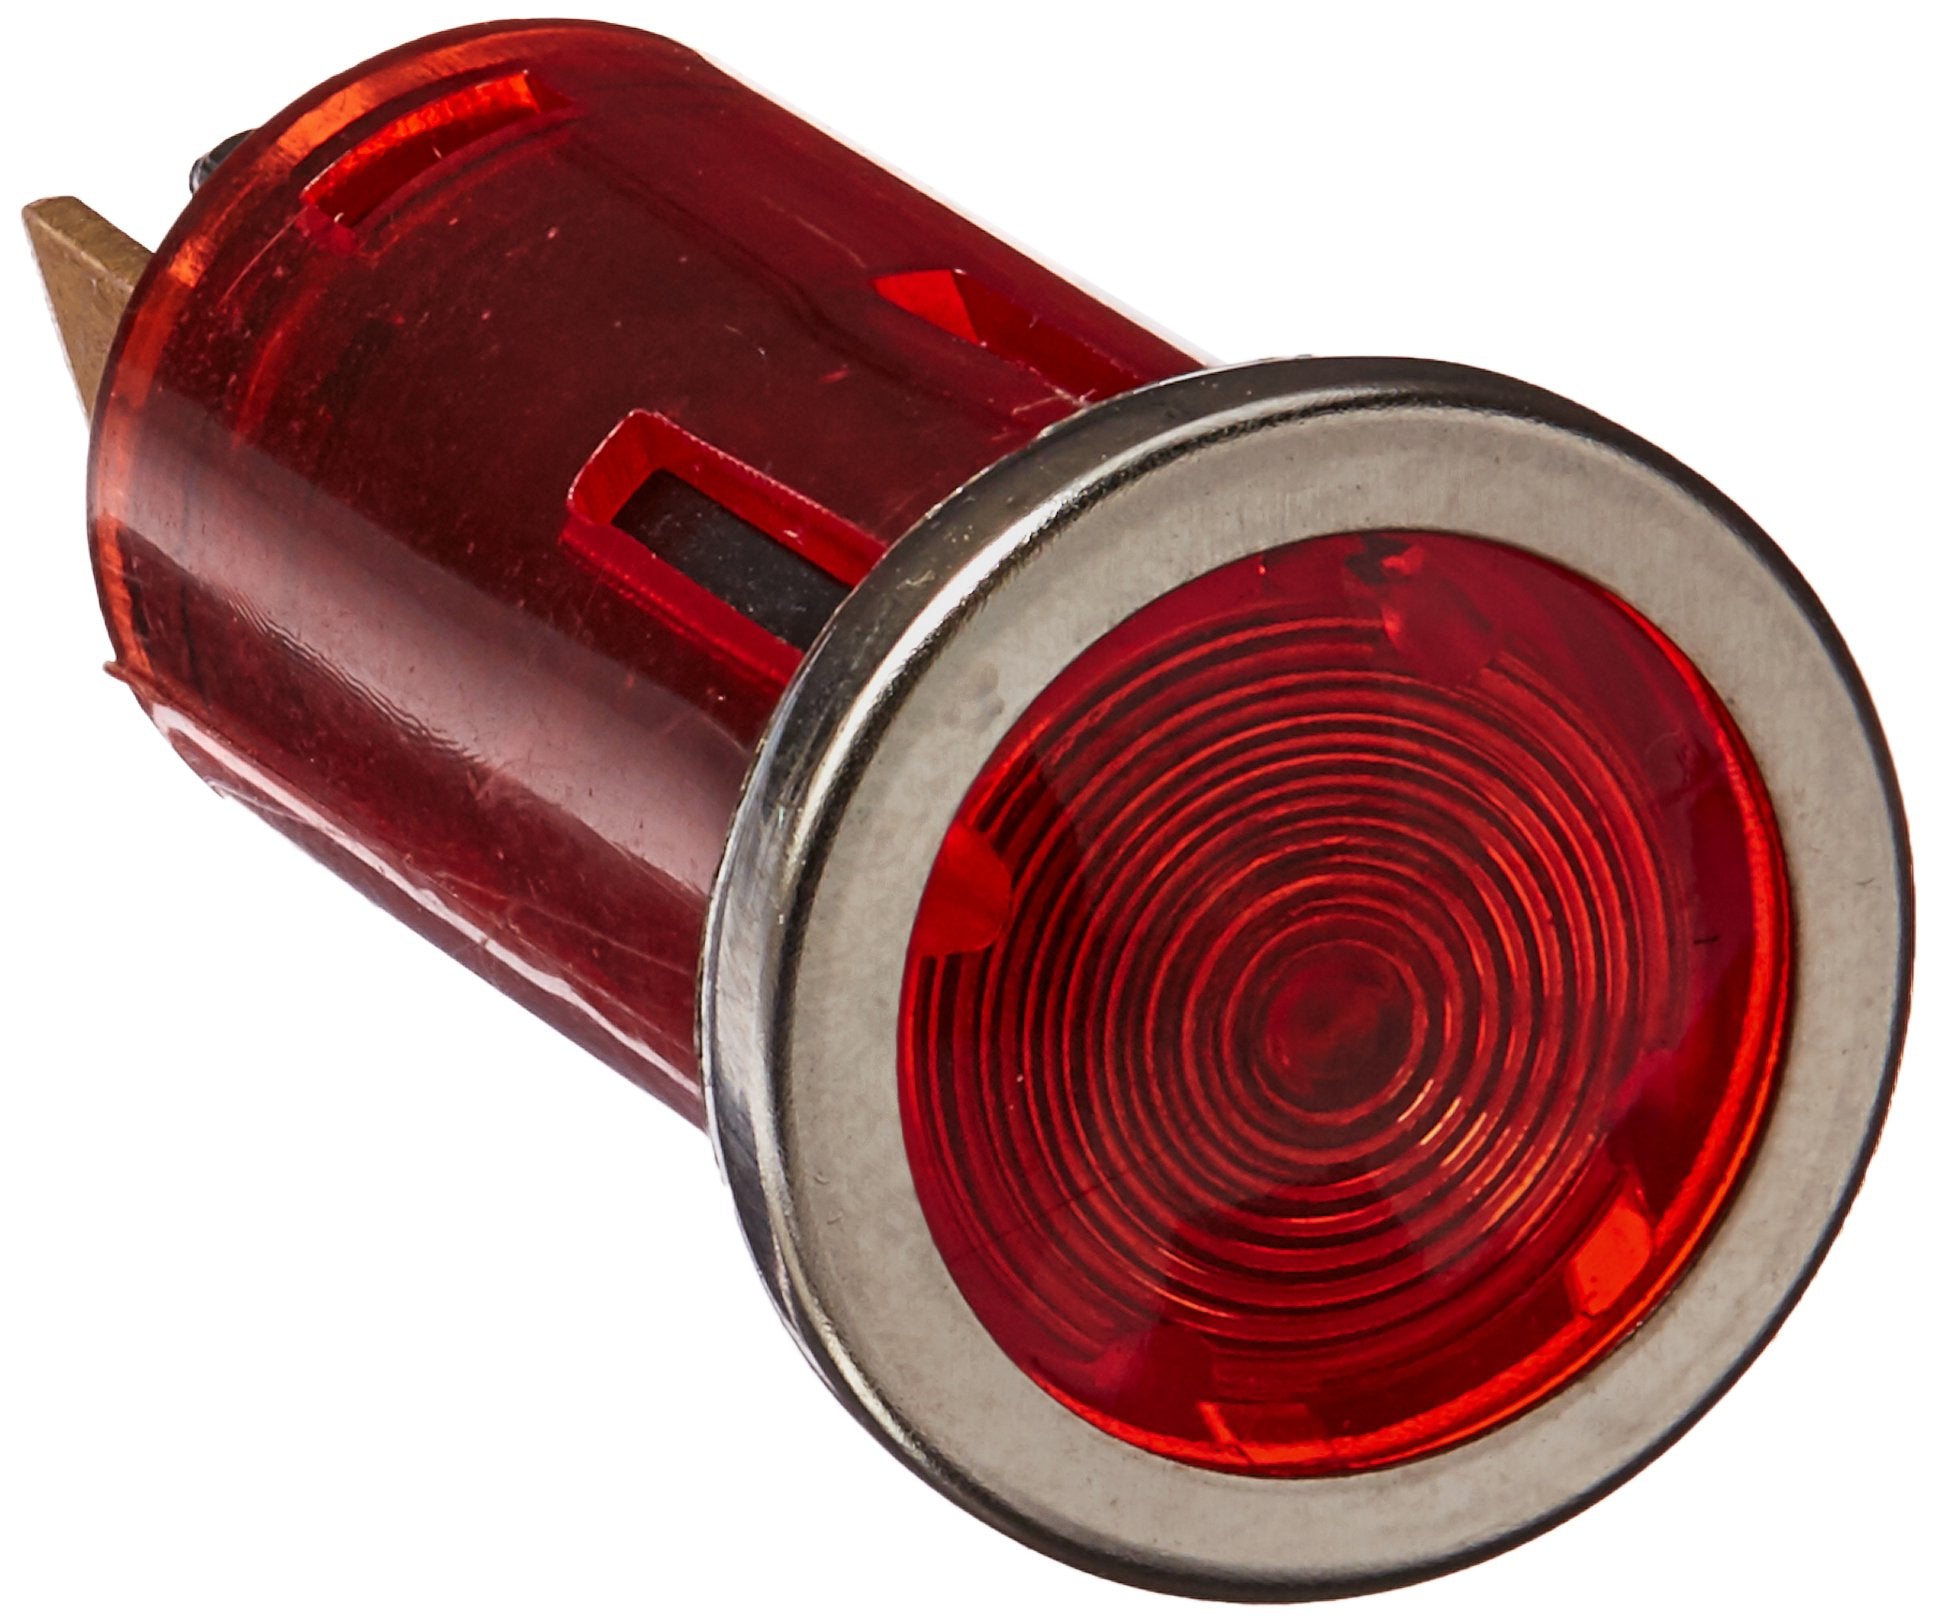 WirthCo 20543 Battery Doctor Red Indicator Light with Chrome Bezel (1/2 Inch Round)